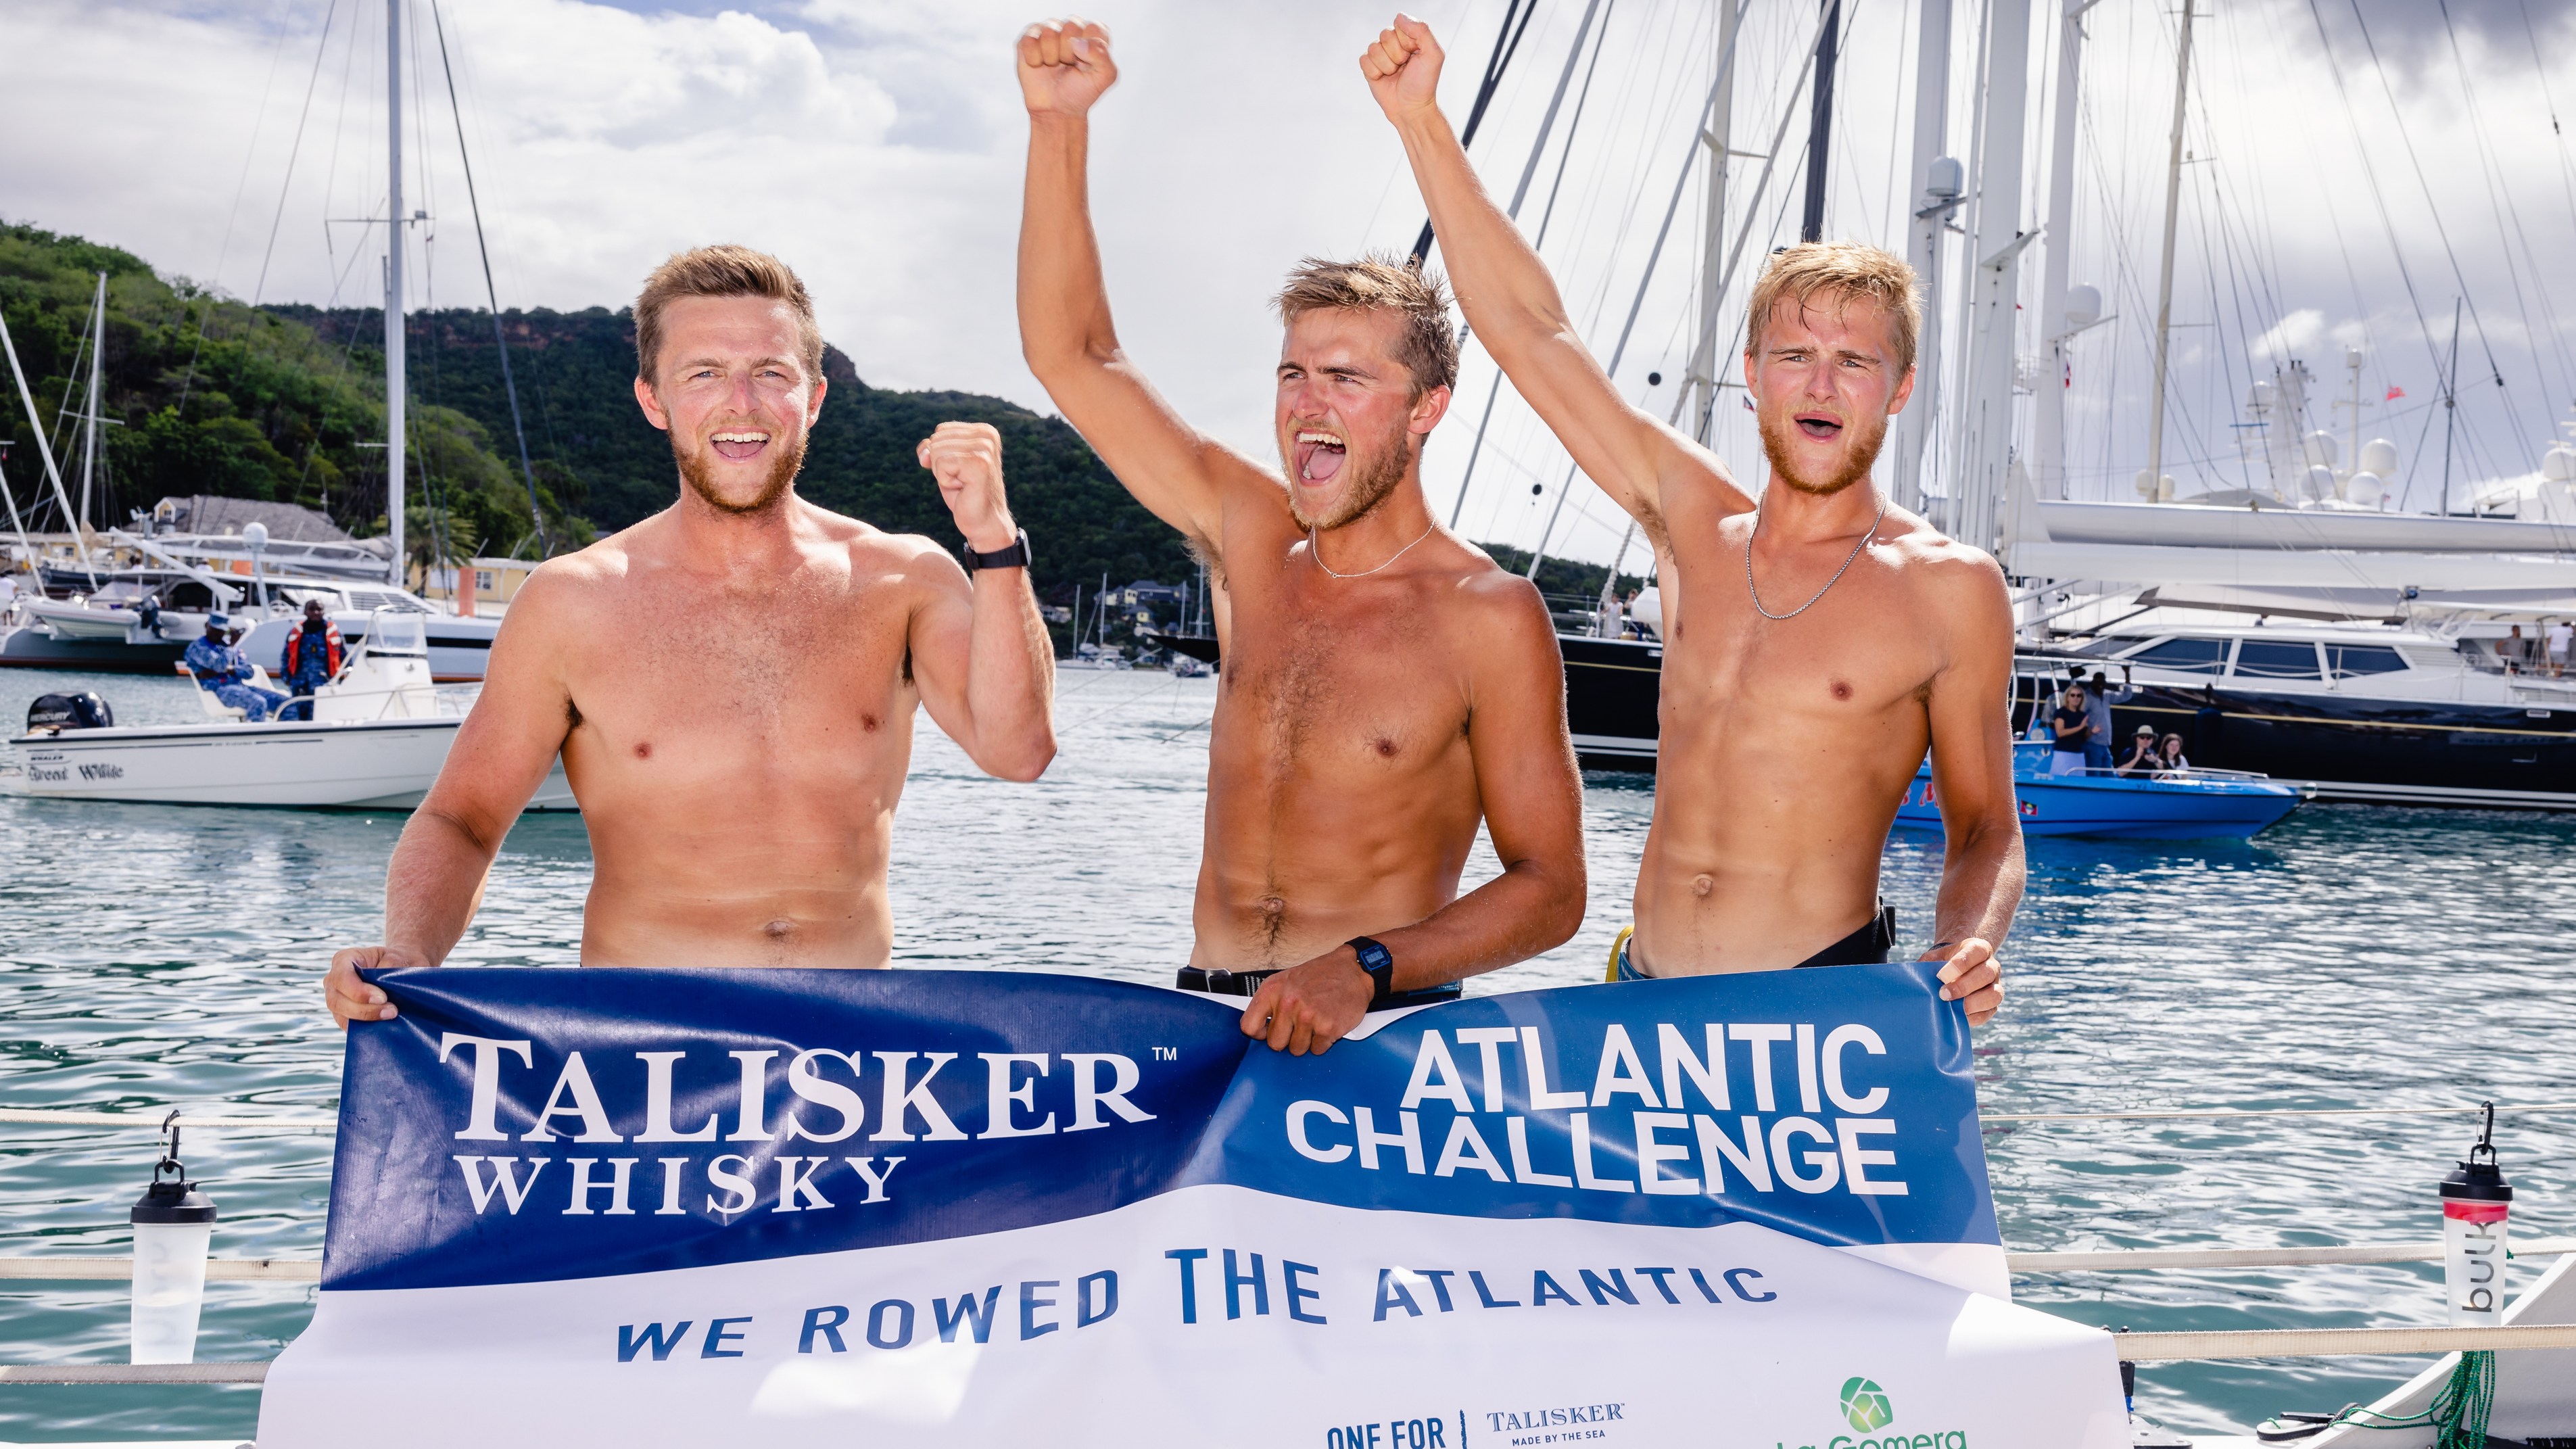 Brothers row Atlantic quicker than Dad — and land £5 bet